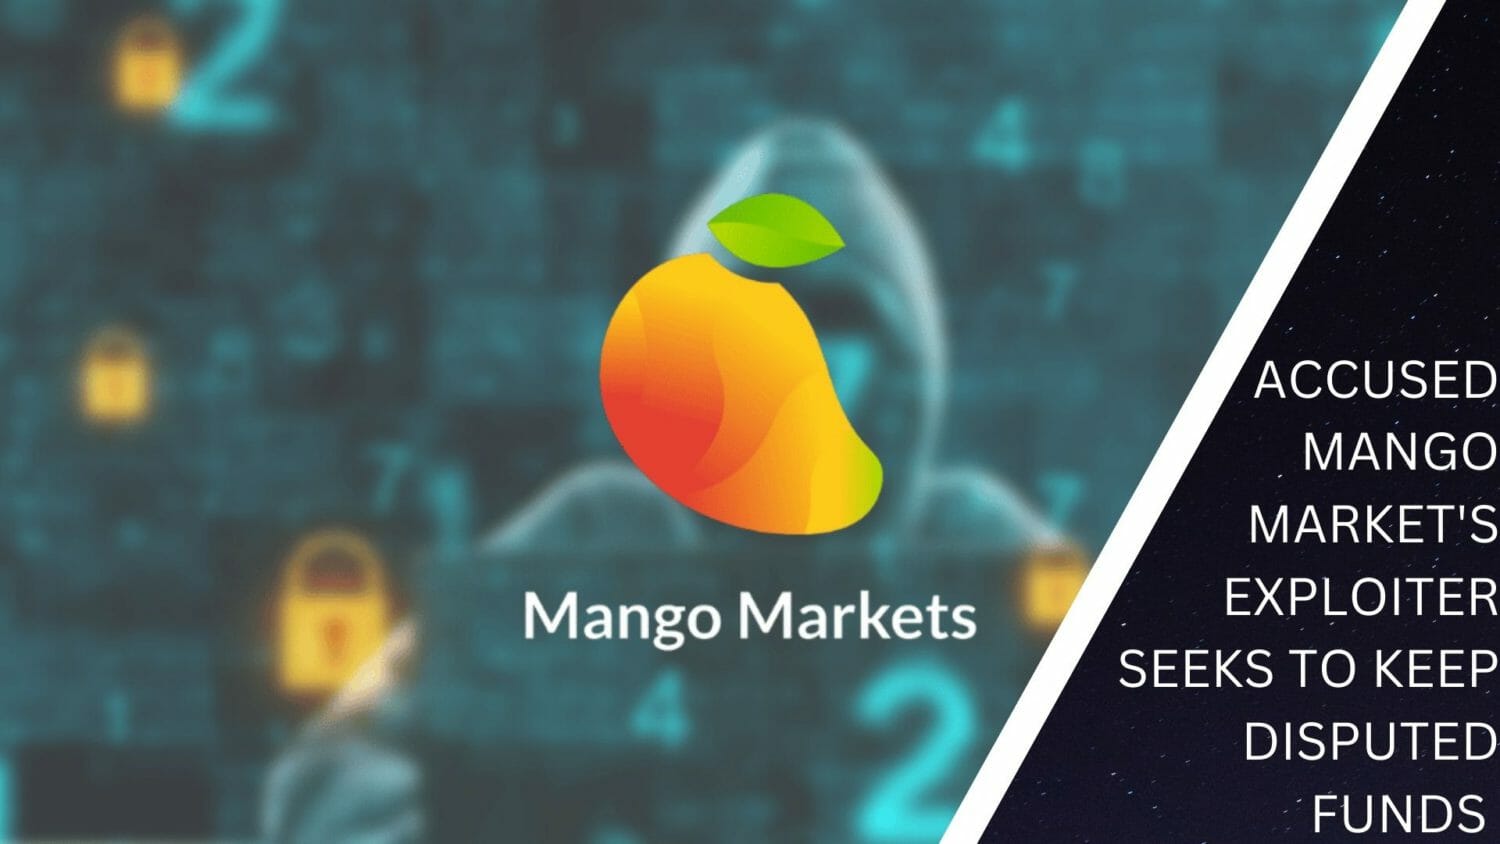 Accused Mango Market'S Exploiter Seeks To Keep Disputed Funds